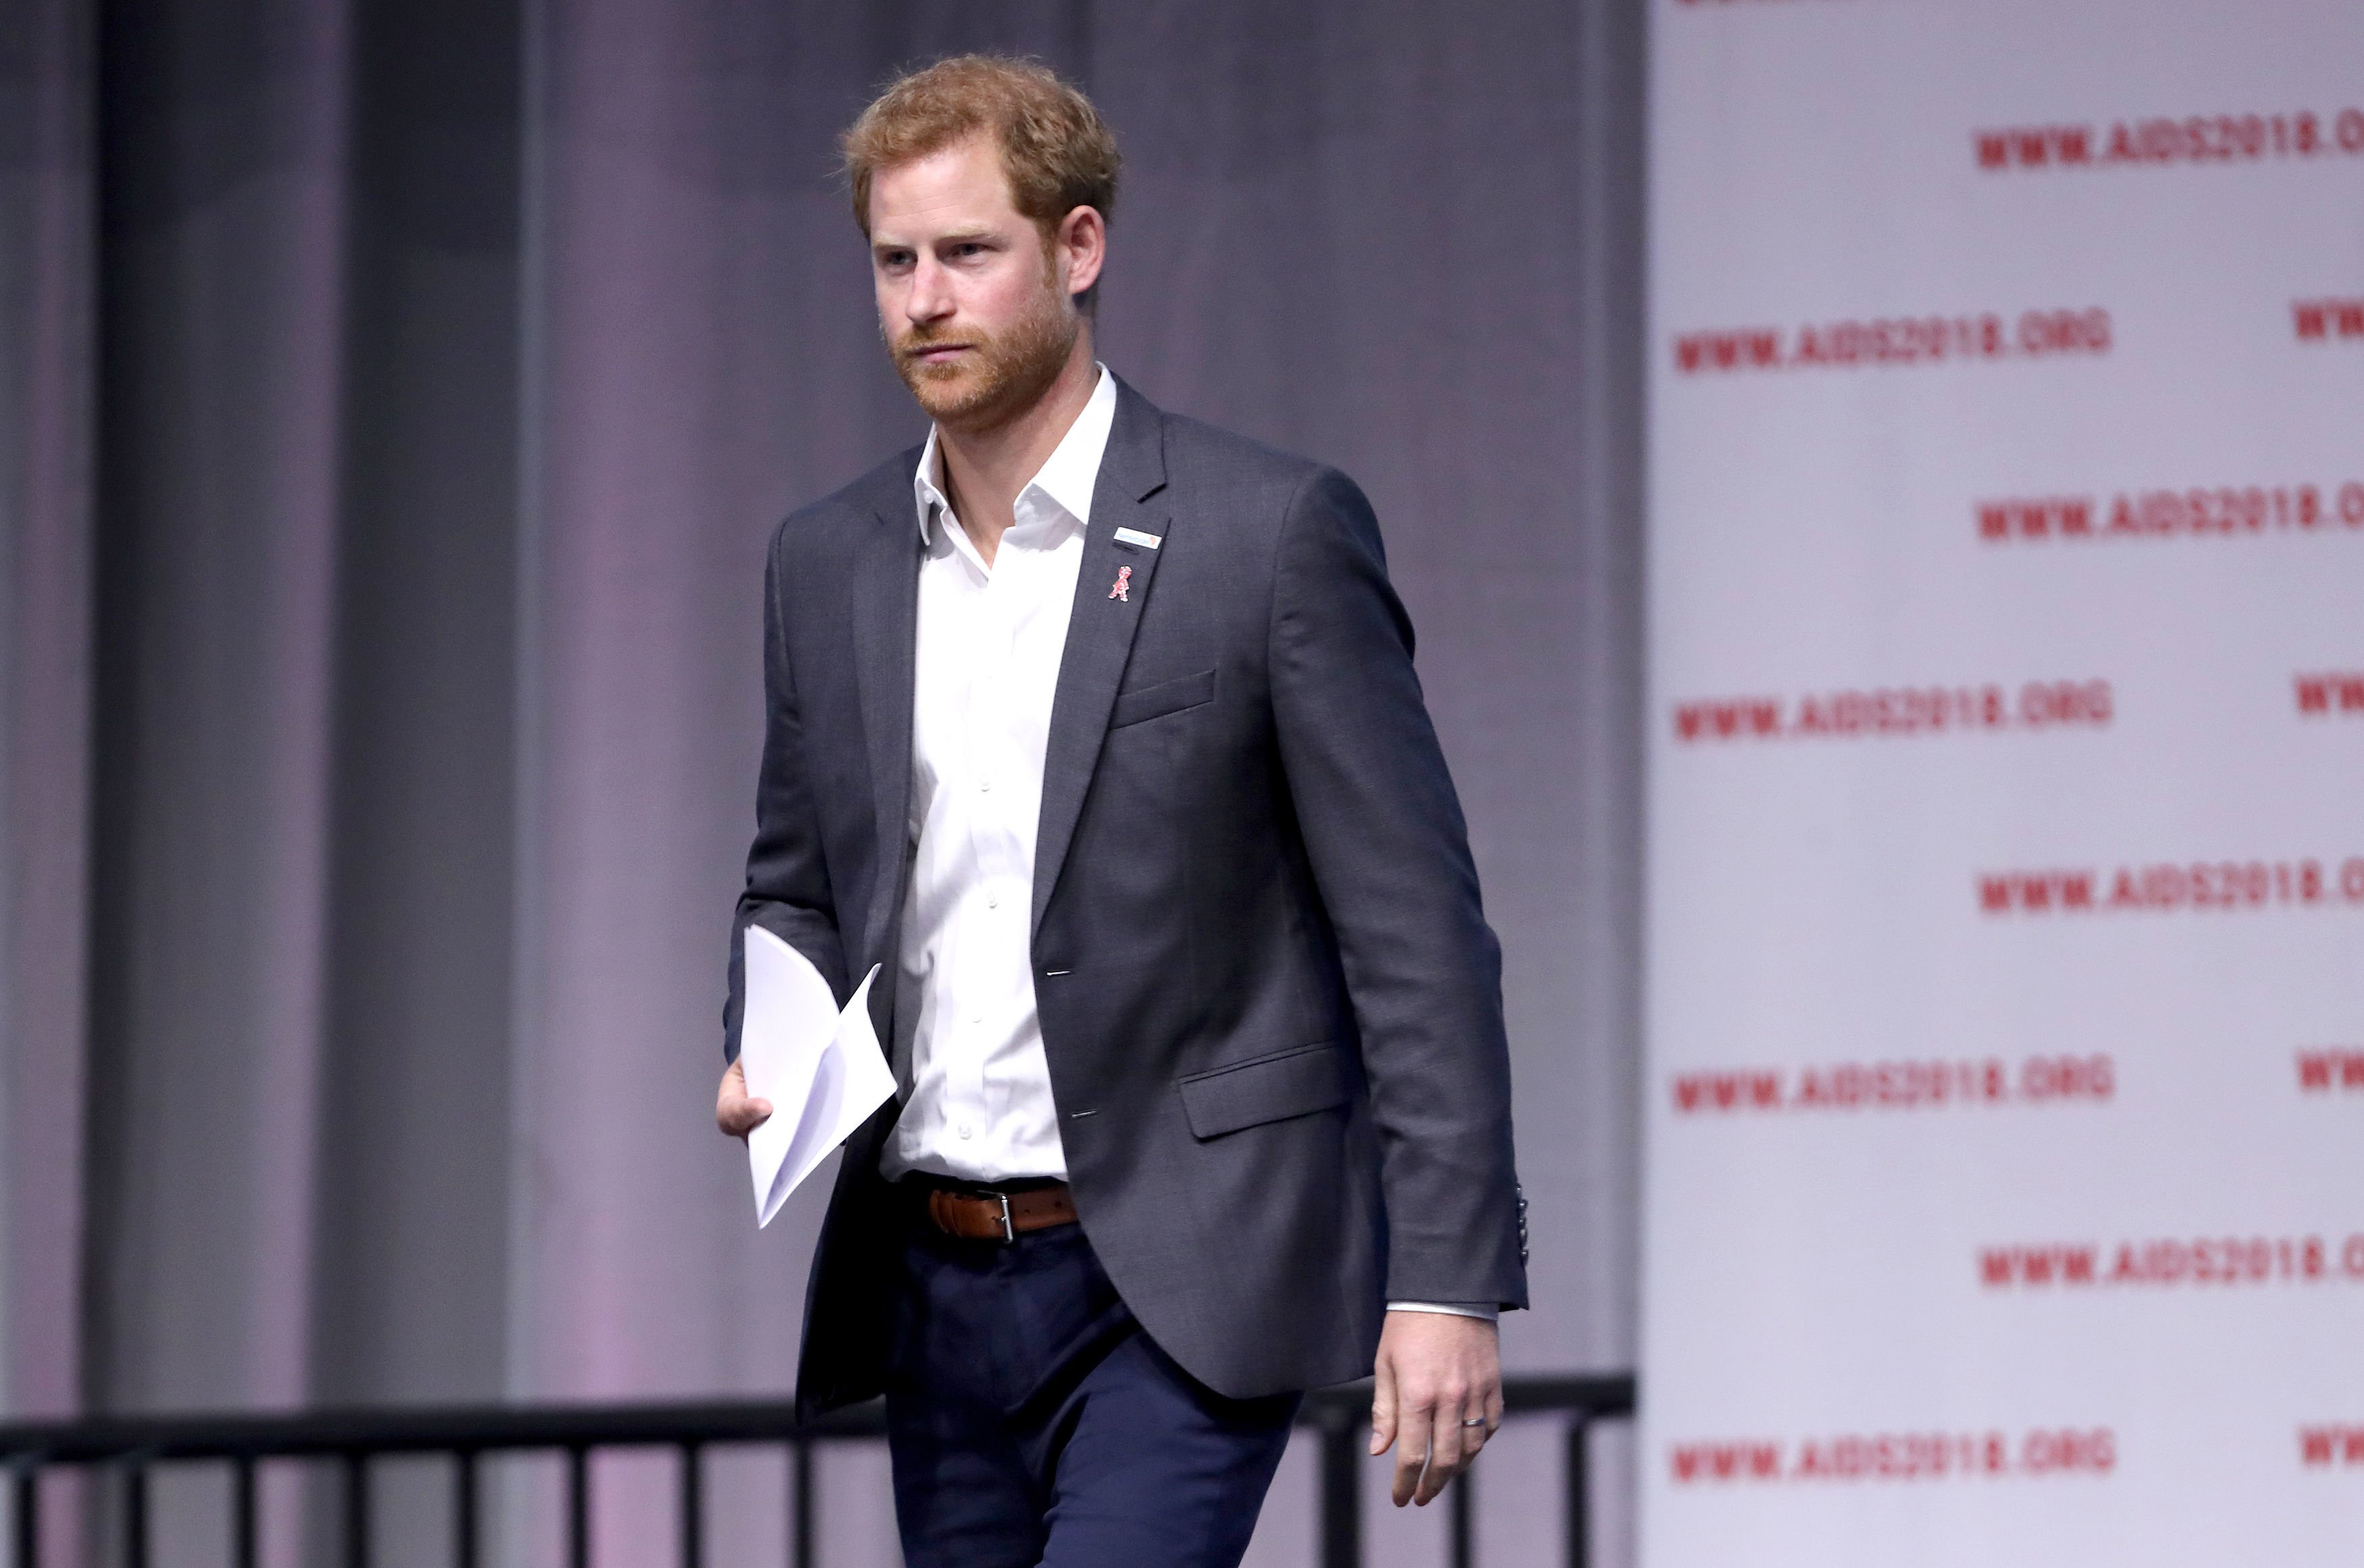 Prince Harry at the Aids 2018 summit in Amsterdam, the Netherlands | Source: Getty Images